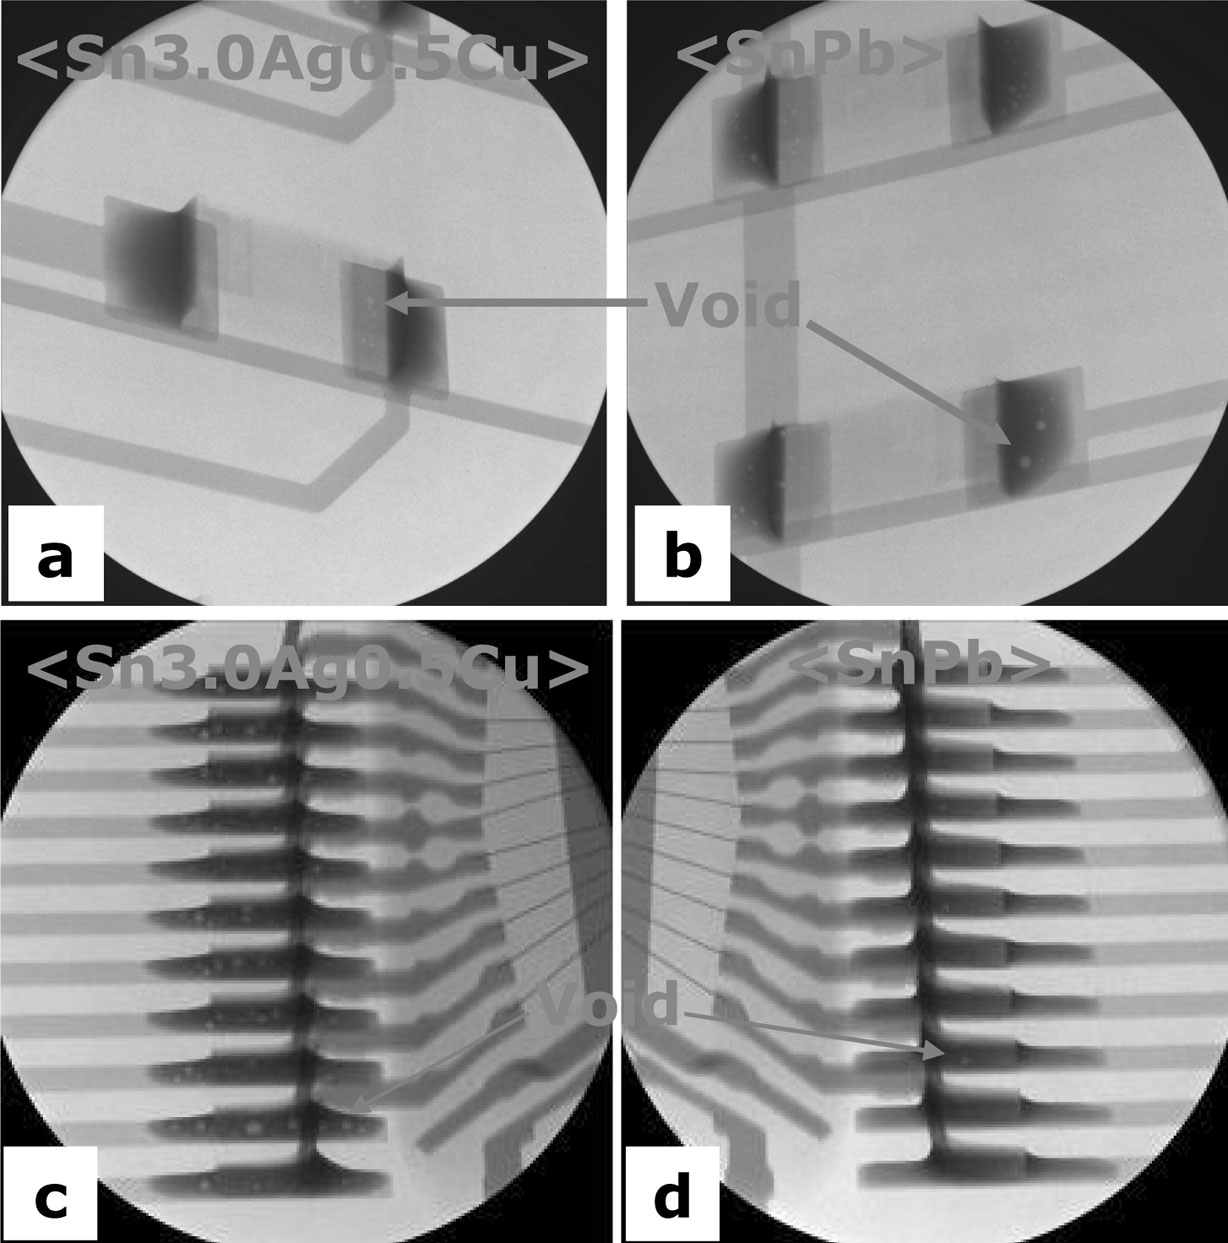 154 y Á½{ Á Á½Ÿ Fig. 3. X-ray nondestructive analysis of solder joint for 3216 chip resistor and 44 pin QFP soldered with (a), (c) Sn-3.0 Ag- 0.5 Cu and (b), (d) Sn-40 Pb, respectively. 3.2 w yw x ³ e w x yw w Fig.